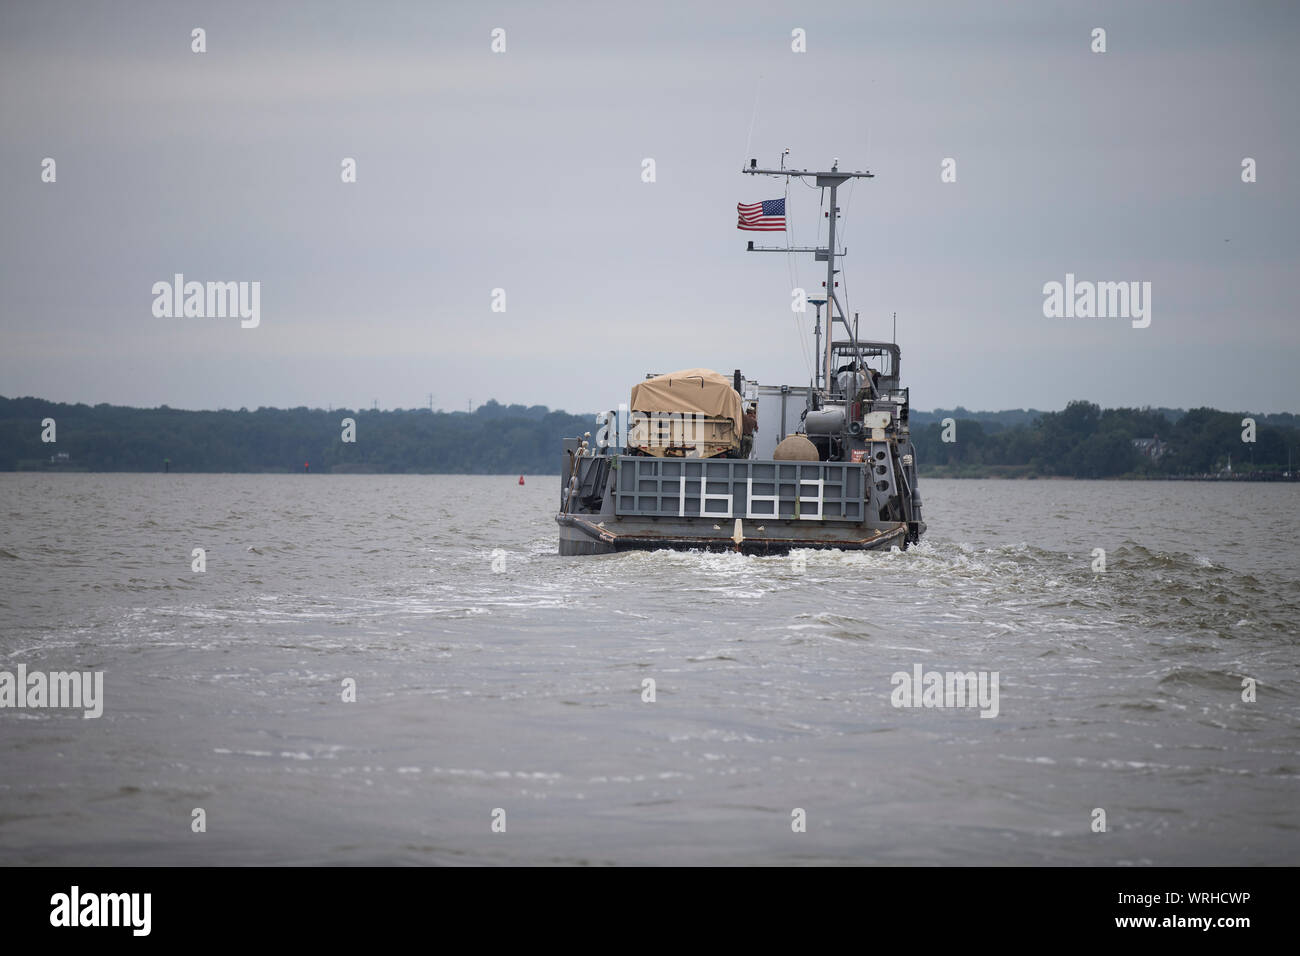 U.S. Marines and Sailors transport vehicles on the Potomac during Capital Shield 19, at Indian Head, Md., Sep 5, 2019. Capital Shield is an exercise to train and prepare emergency responders in the National Capital Region for chemical exposure and response. (U.S. Marine Corps photo by Lance Cpl. Sarah N. Petrock) Stock Photo